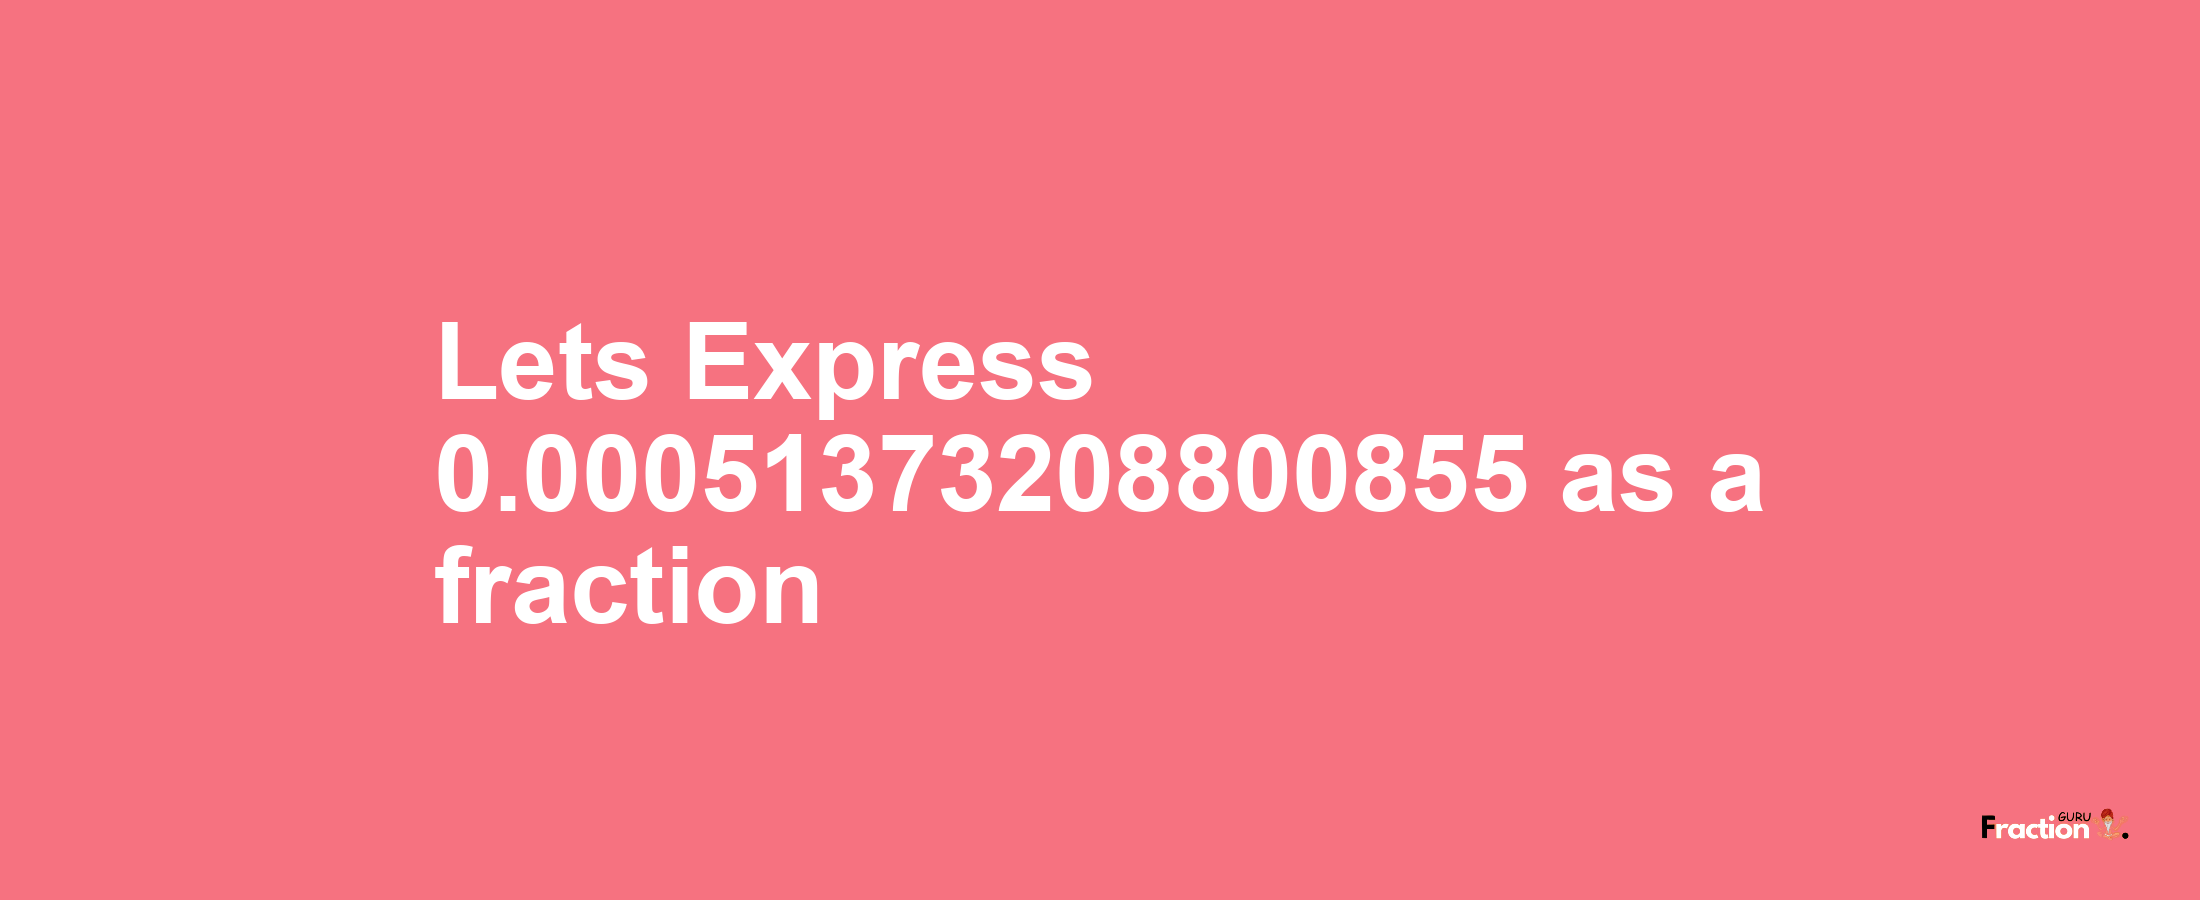 Lets Express 0.00051373208800855 as afraction